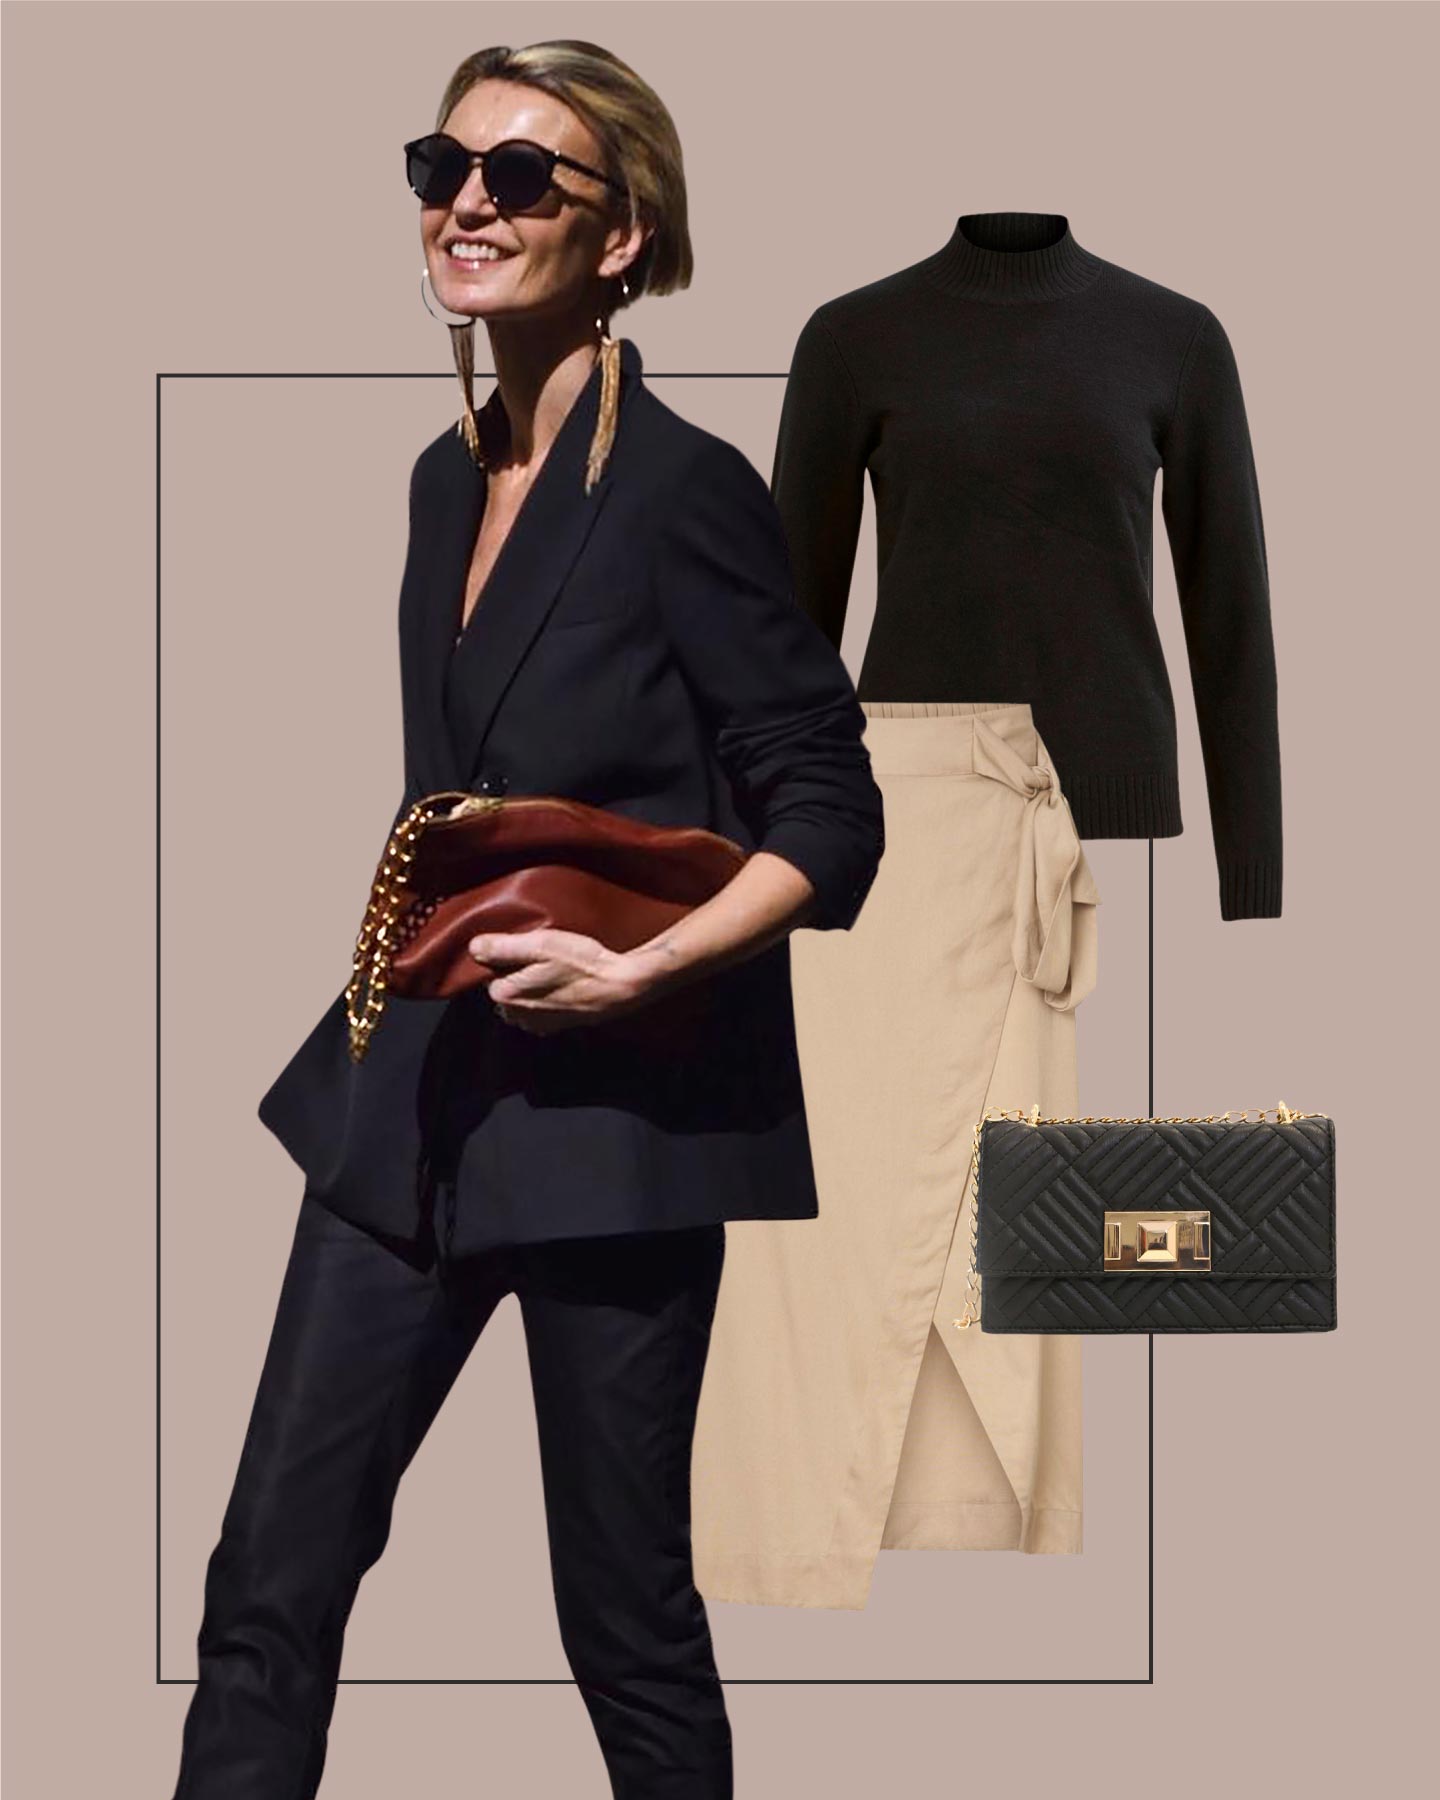 Business Casual Outfit Ideas & Tips For Women Over 40